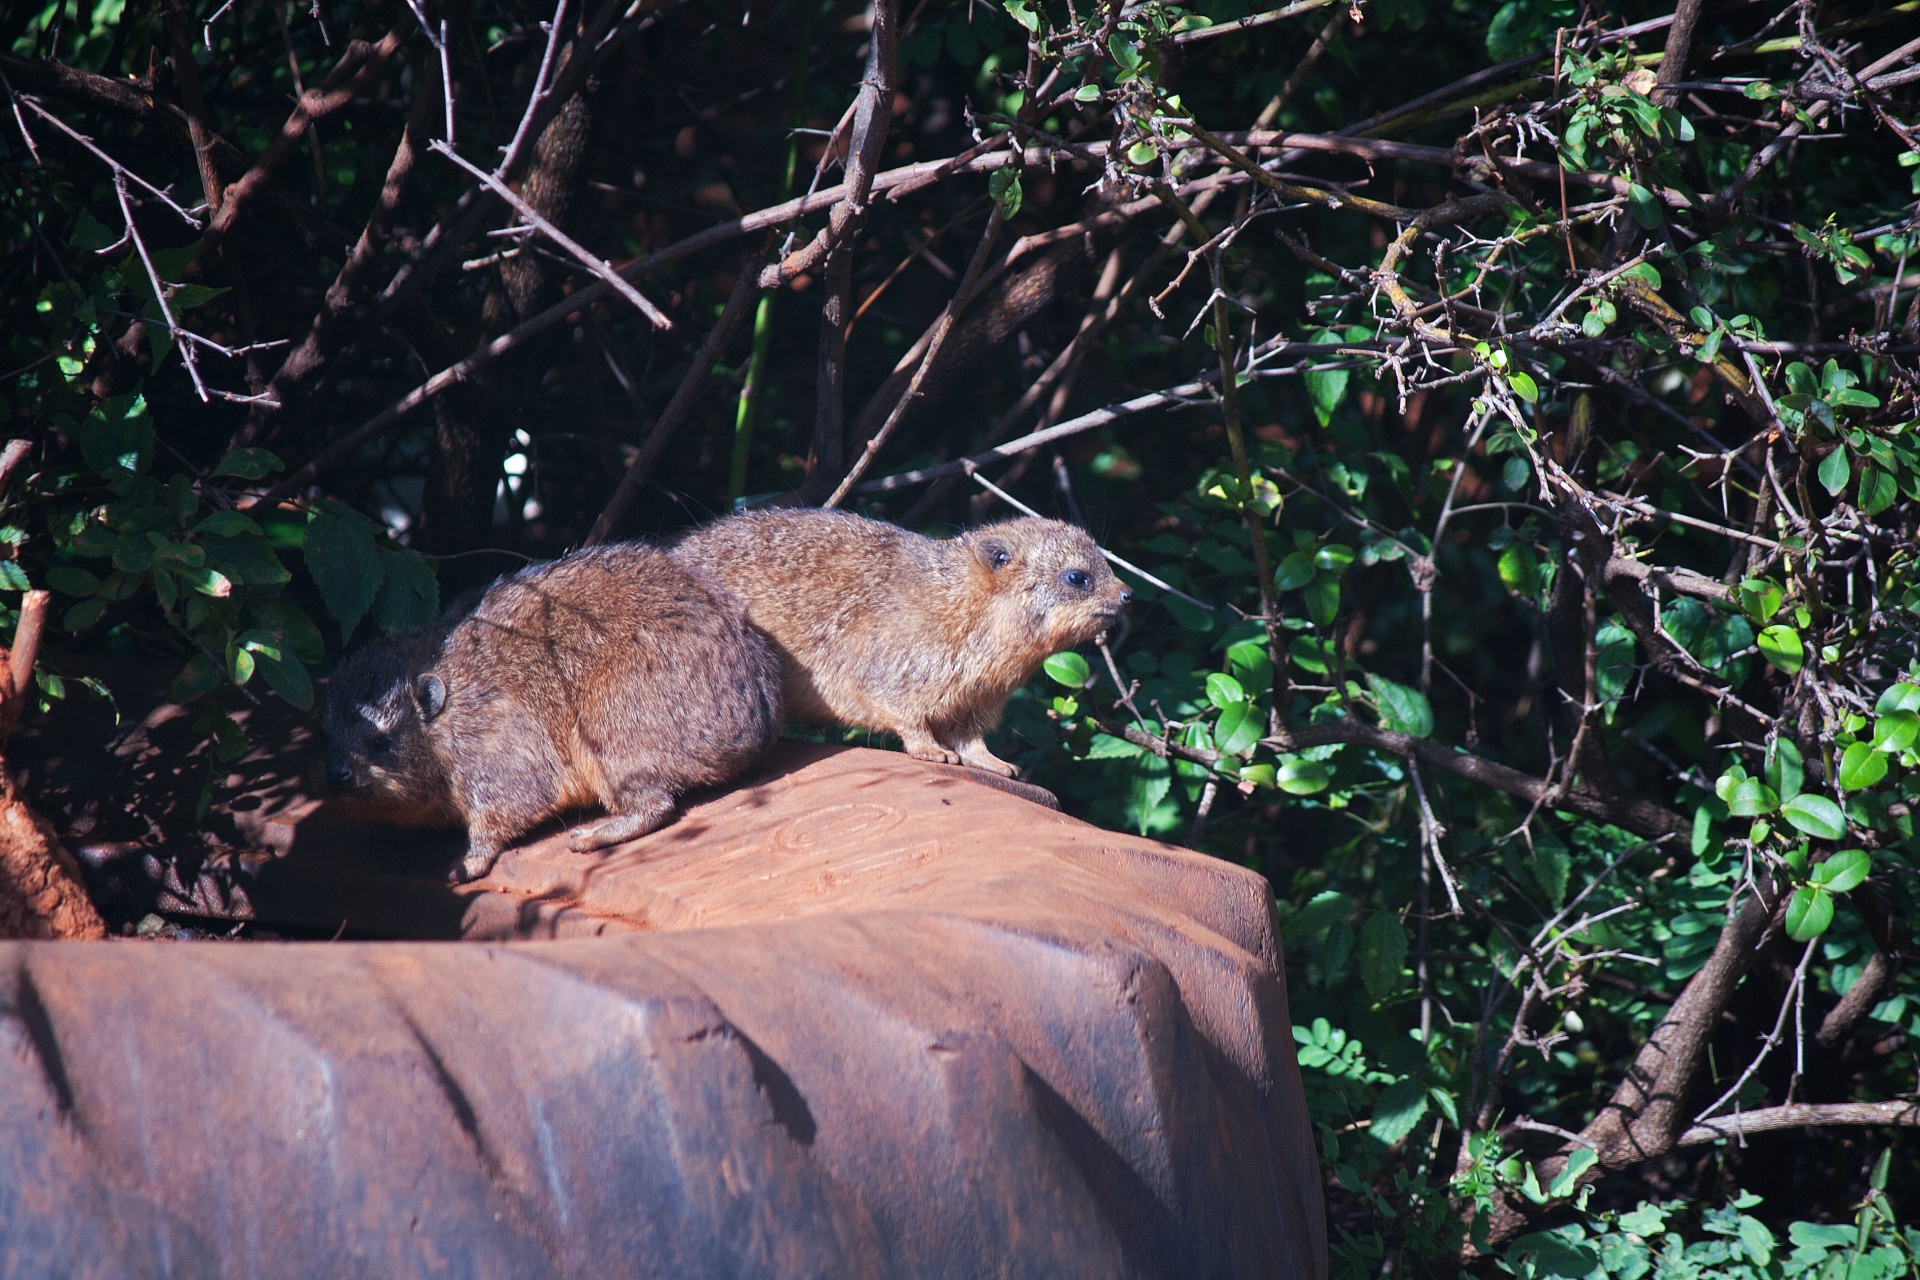 hyrax in the sun on an old tyre in a park